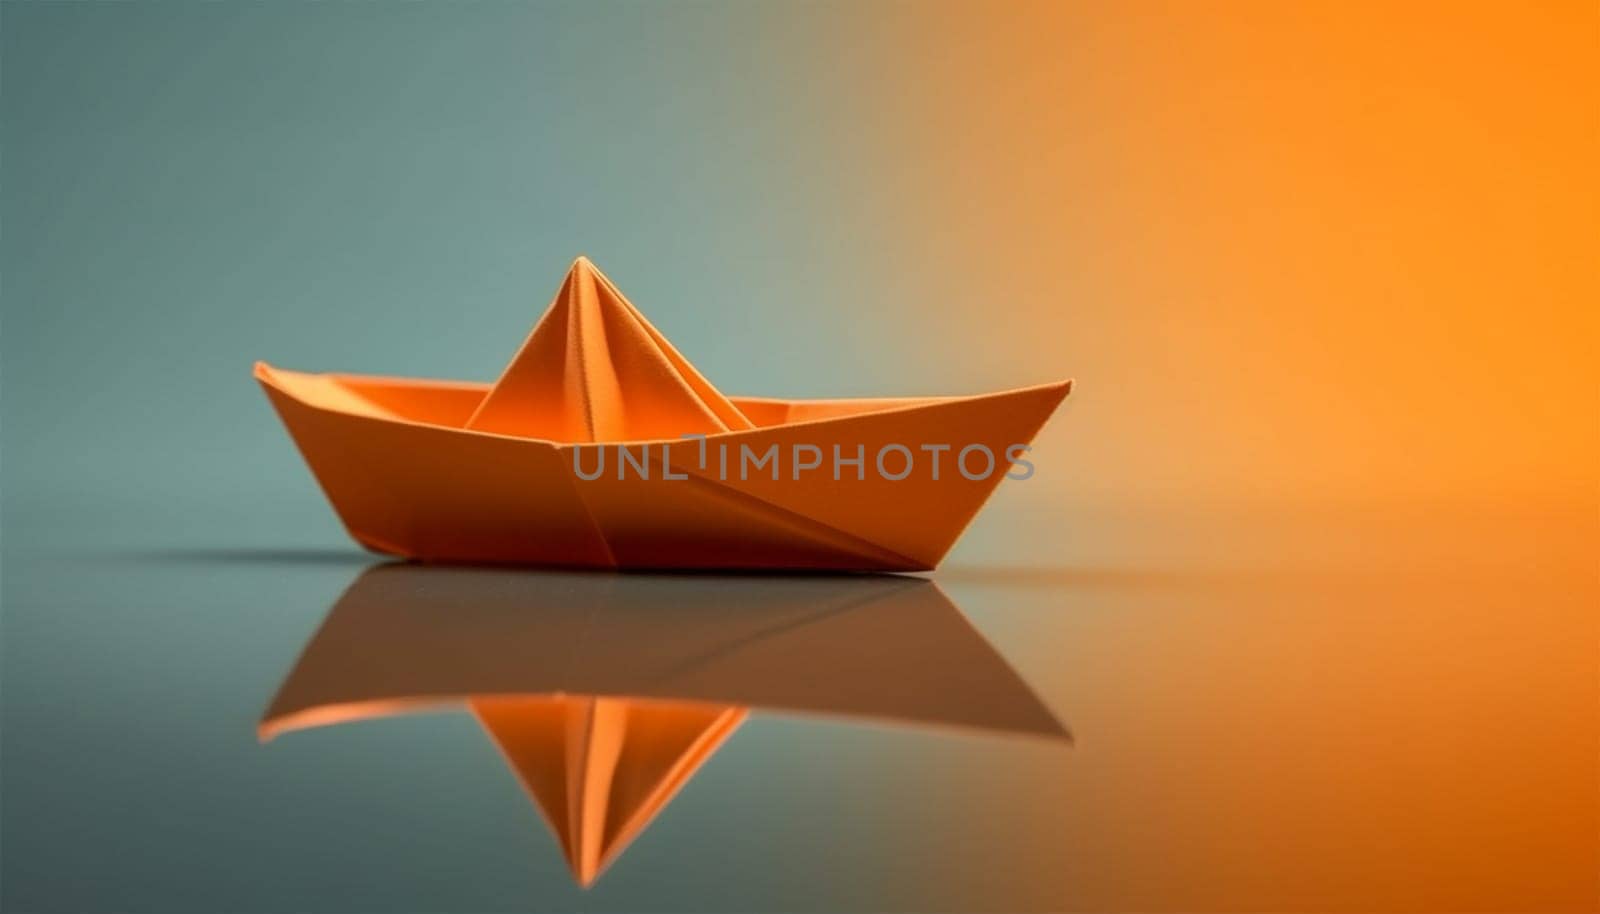 Creative image of white origami ships placed behind blue and orange paper ship representing concept of leadership on light background Copy space. Business concept design. by Annebel146